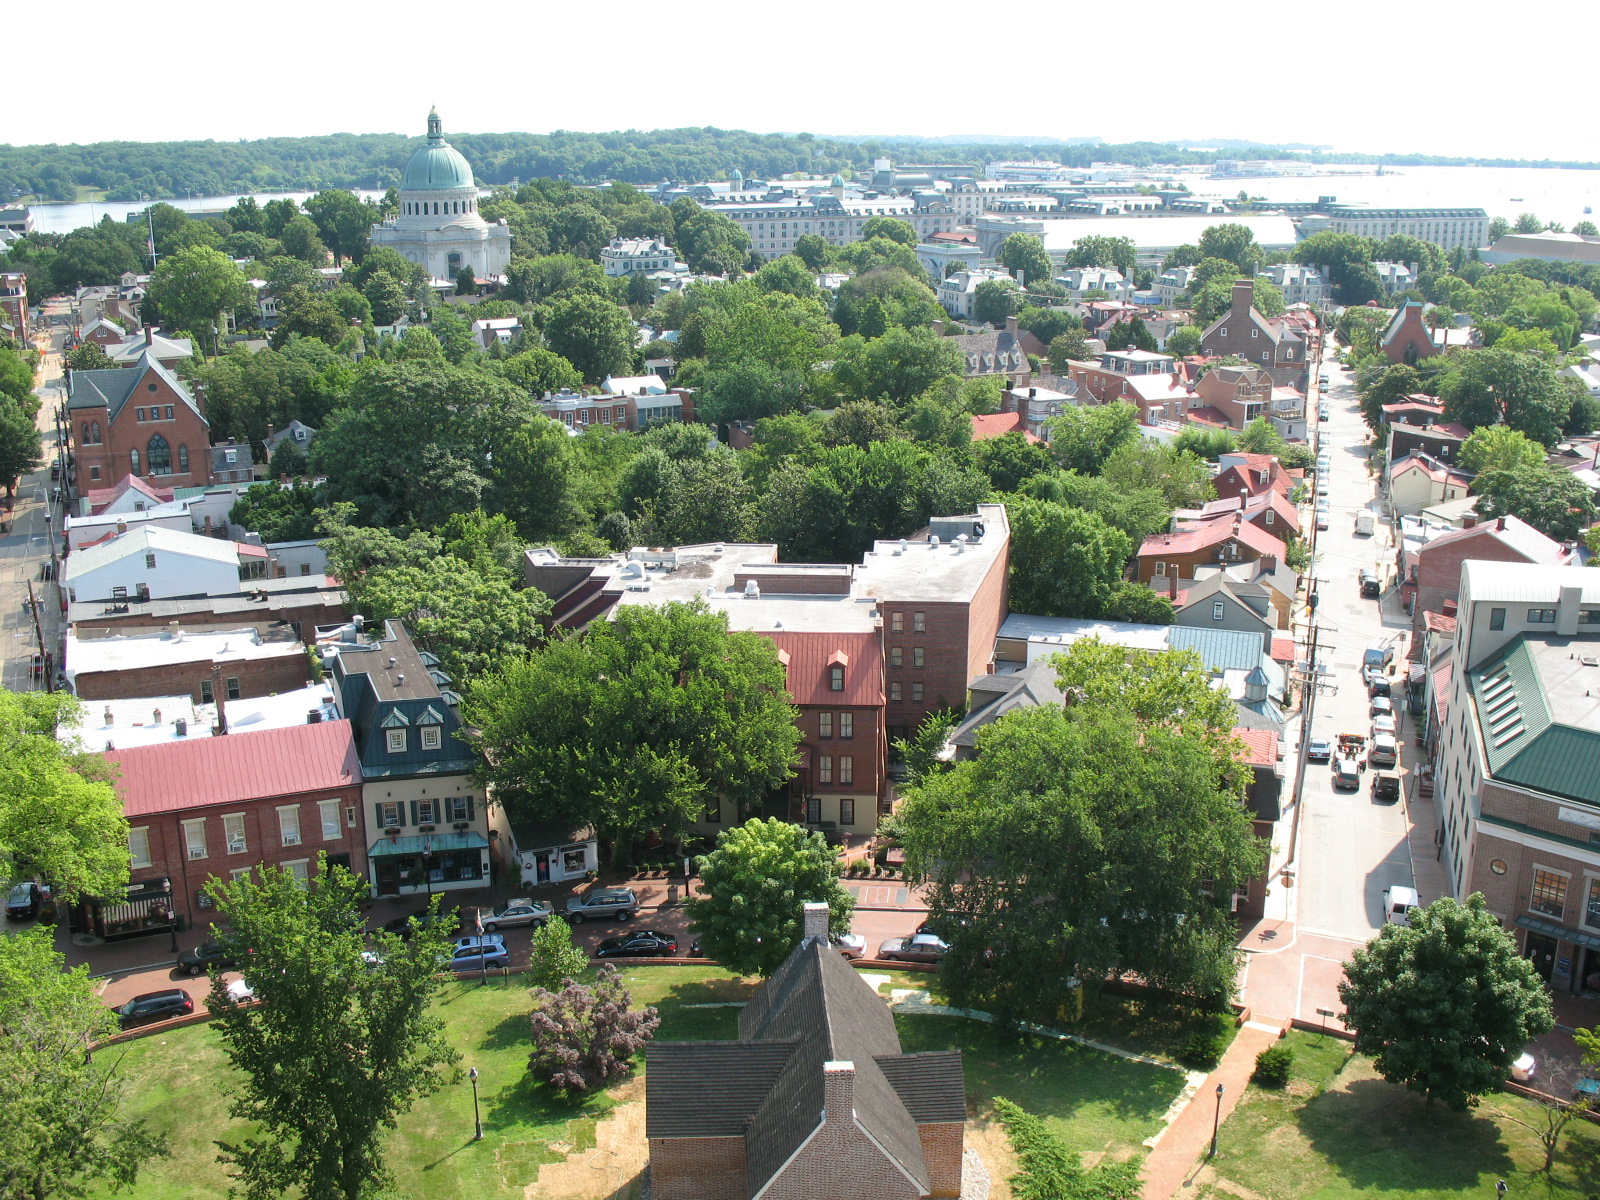 annapolis-historical-cities-in-the-us